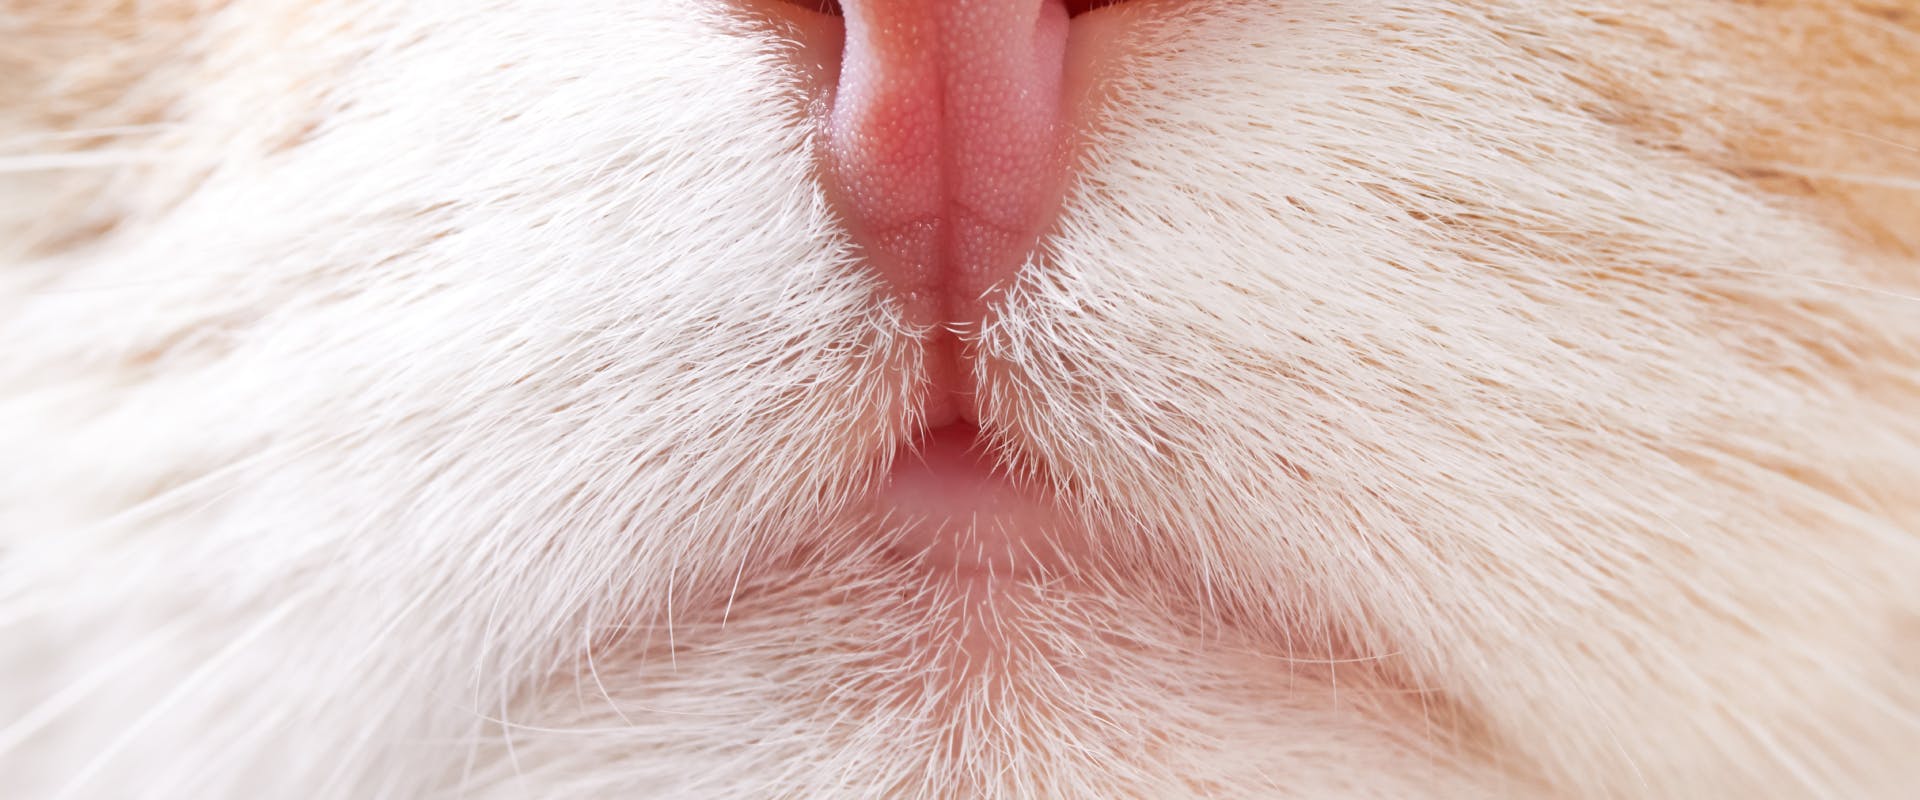 a close up of a cat's lips and bottom of its nose